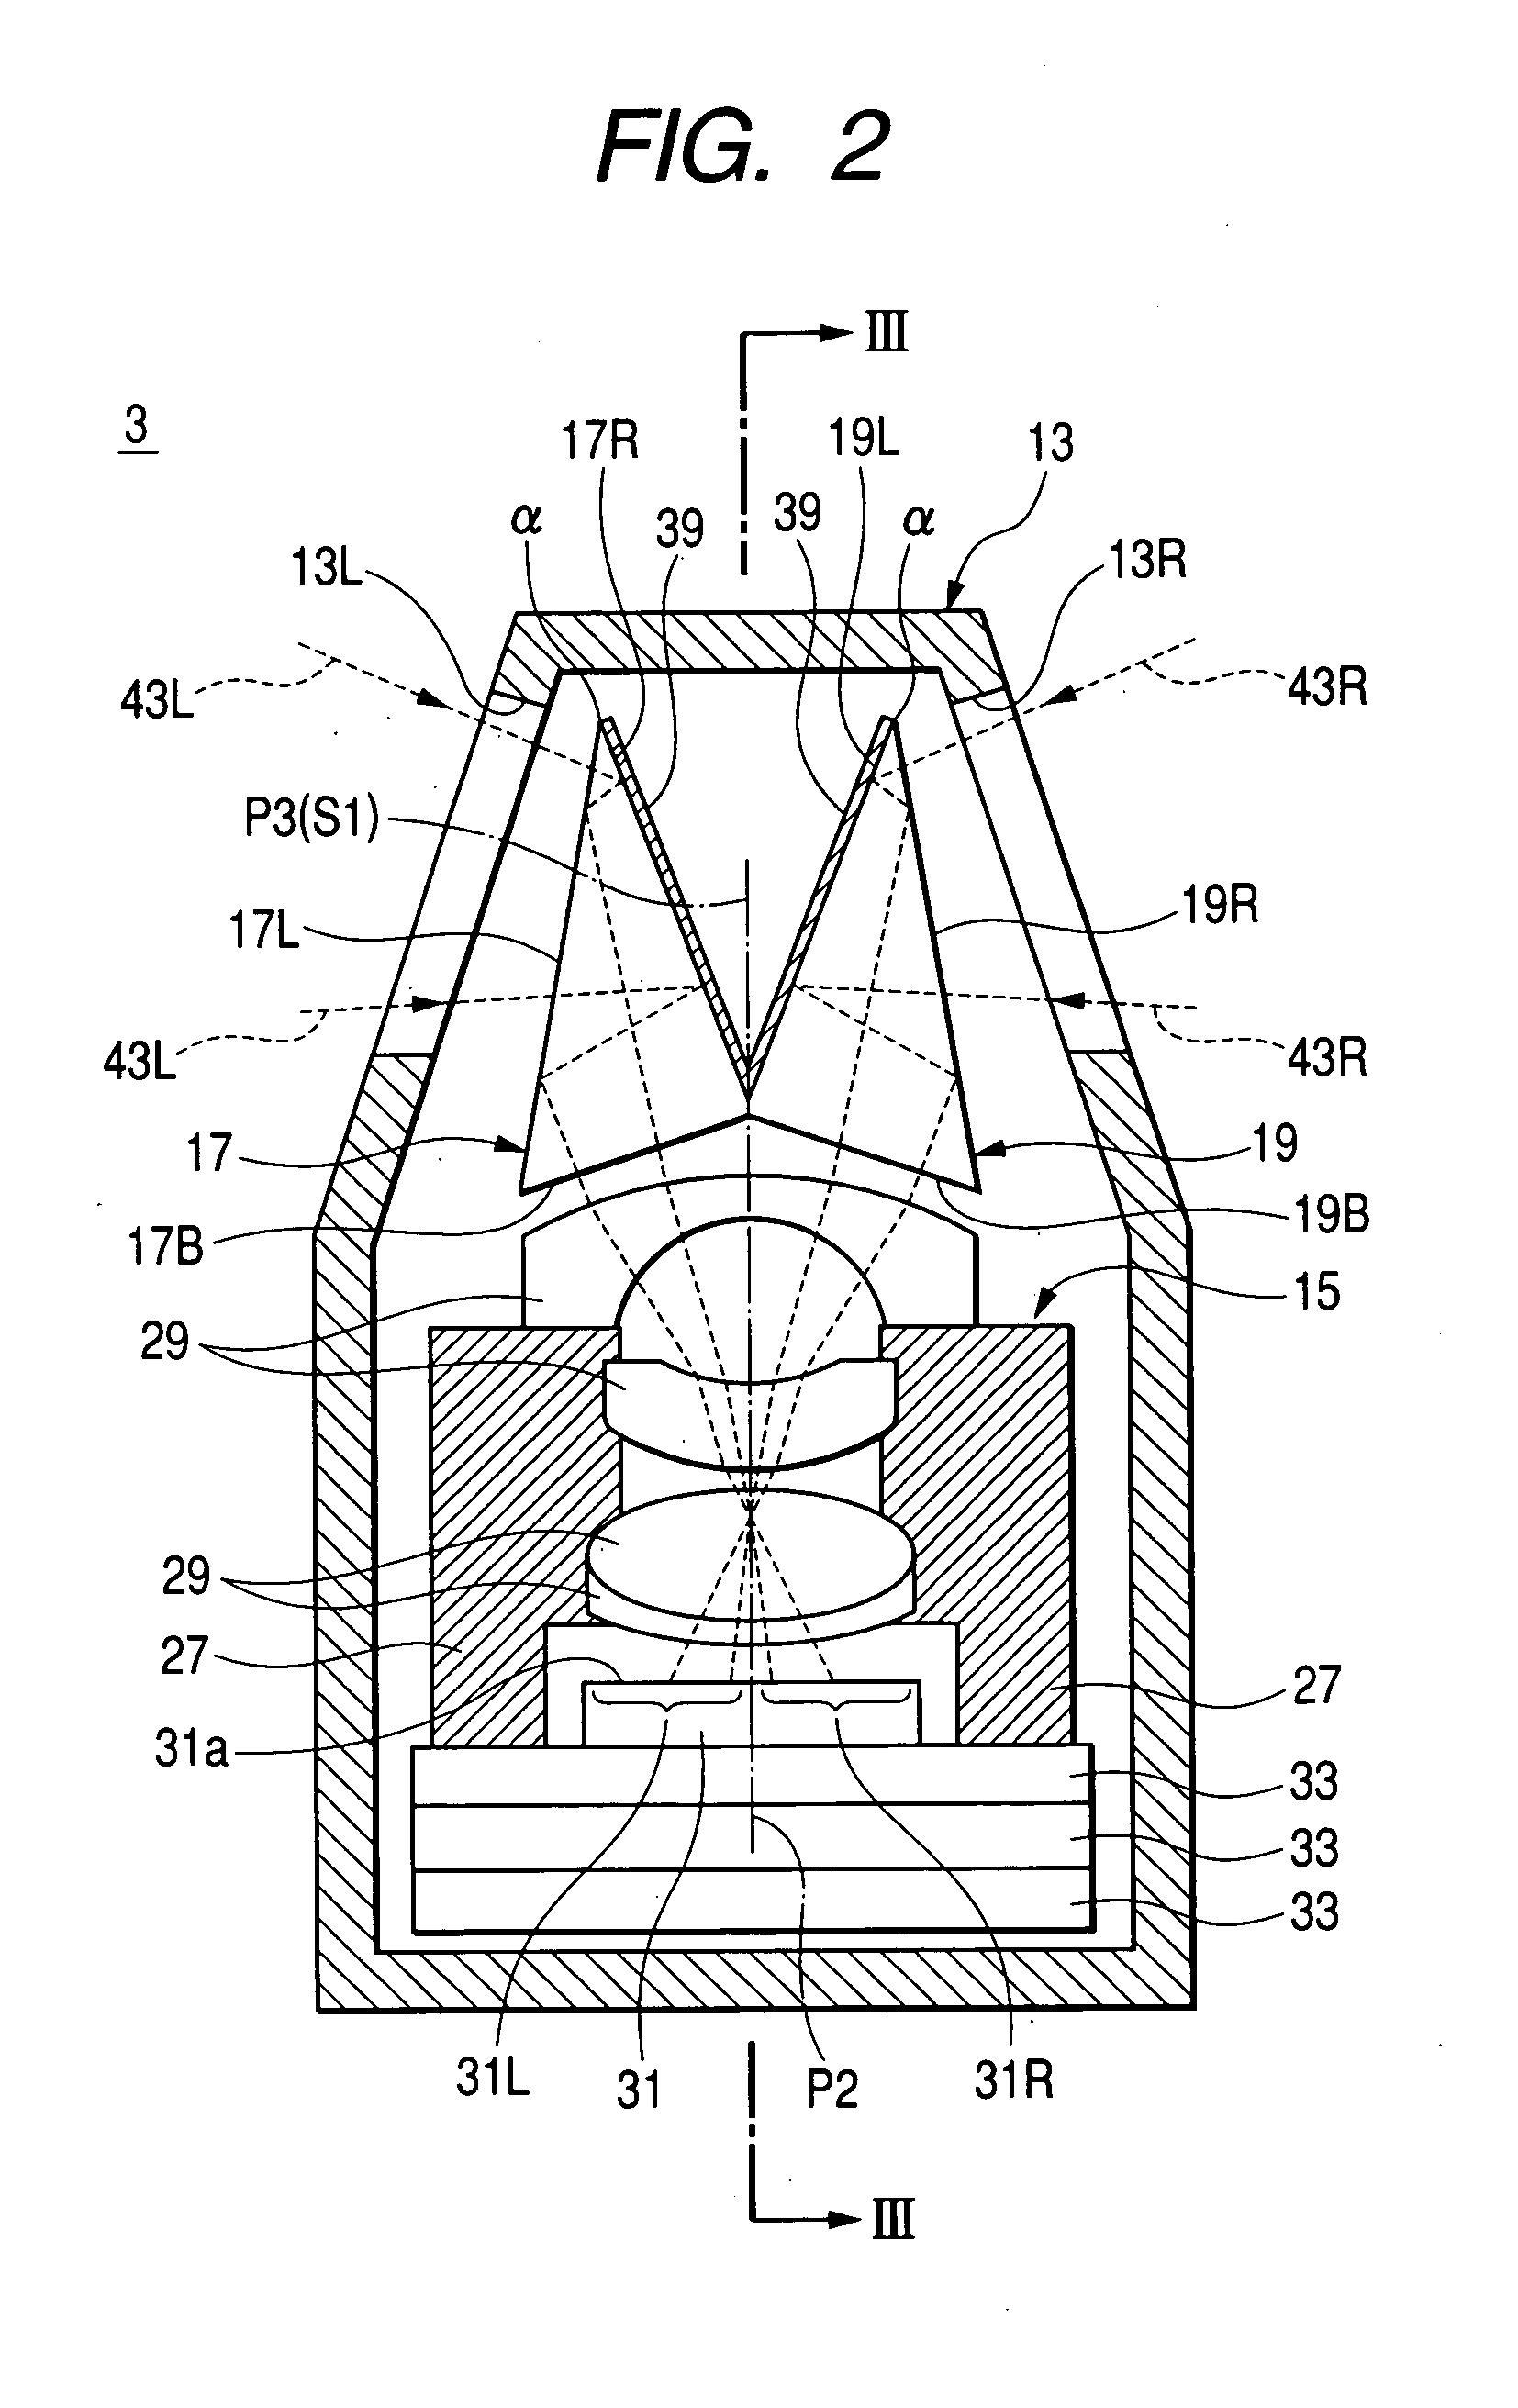 Apparatus for visually confirming vehicle periphery